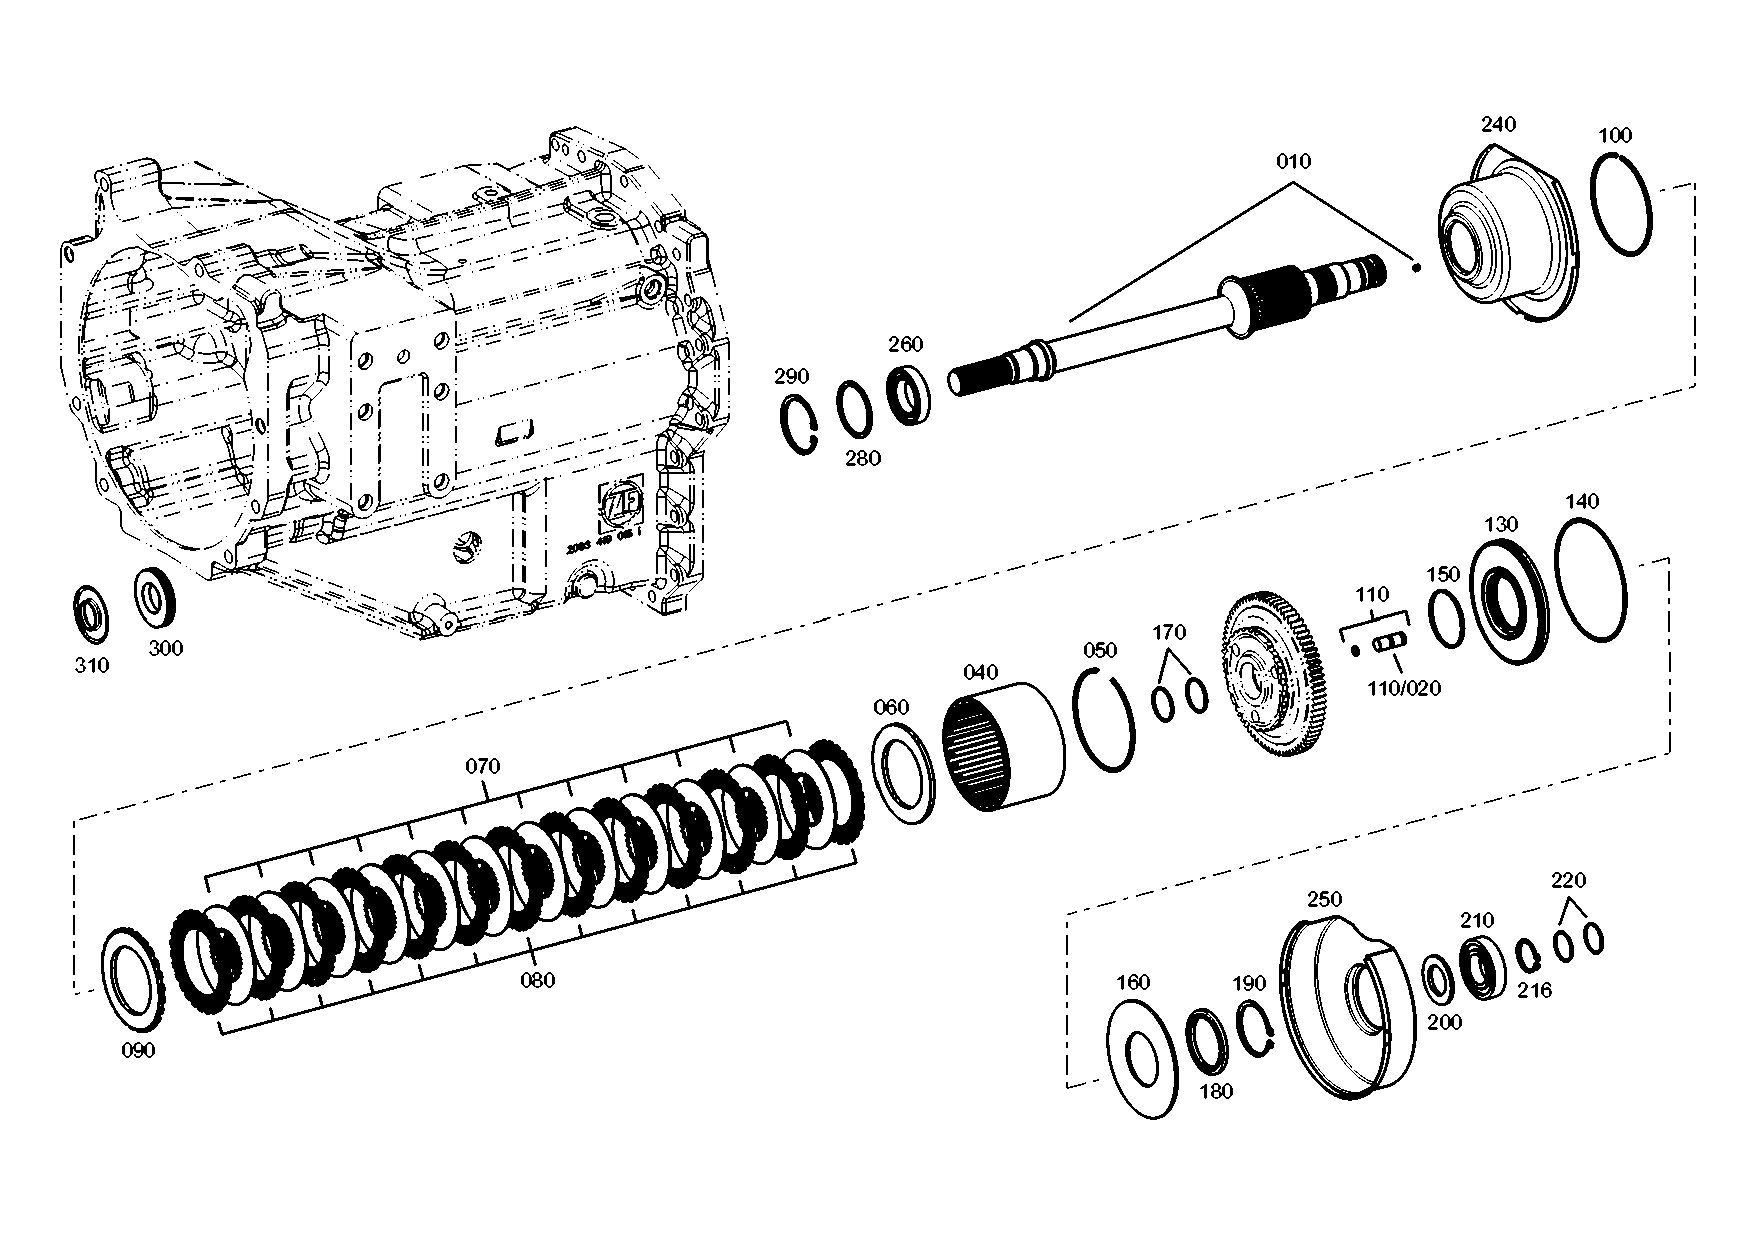 drawing for CNH NEW HOLLAND 81753C1 - DISC CARRIER (figure 1)